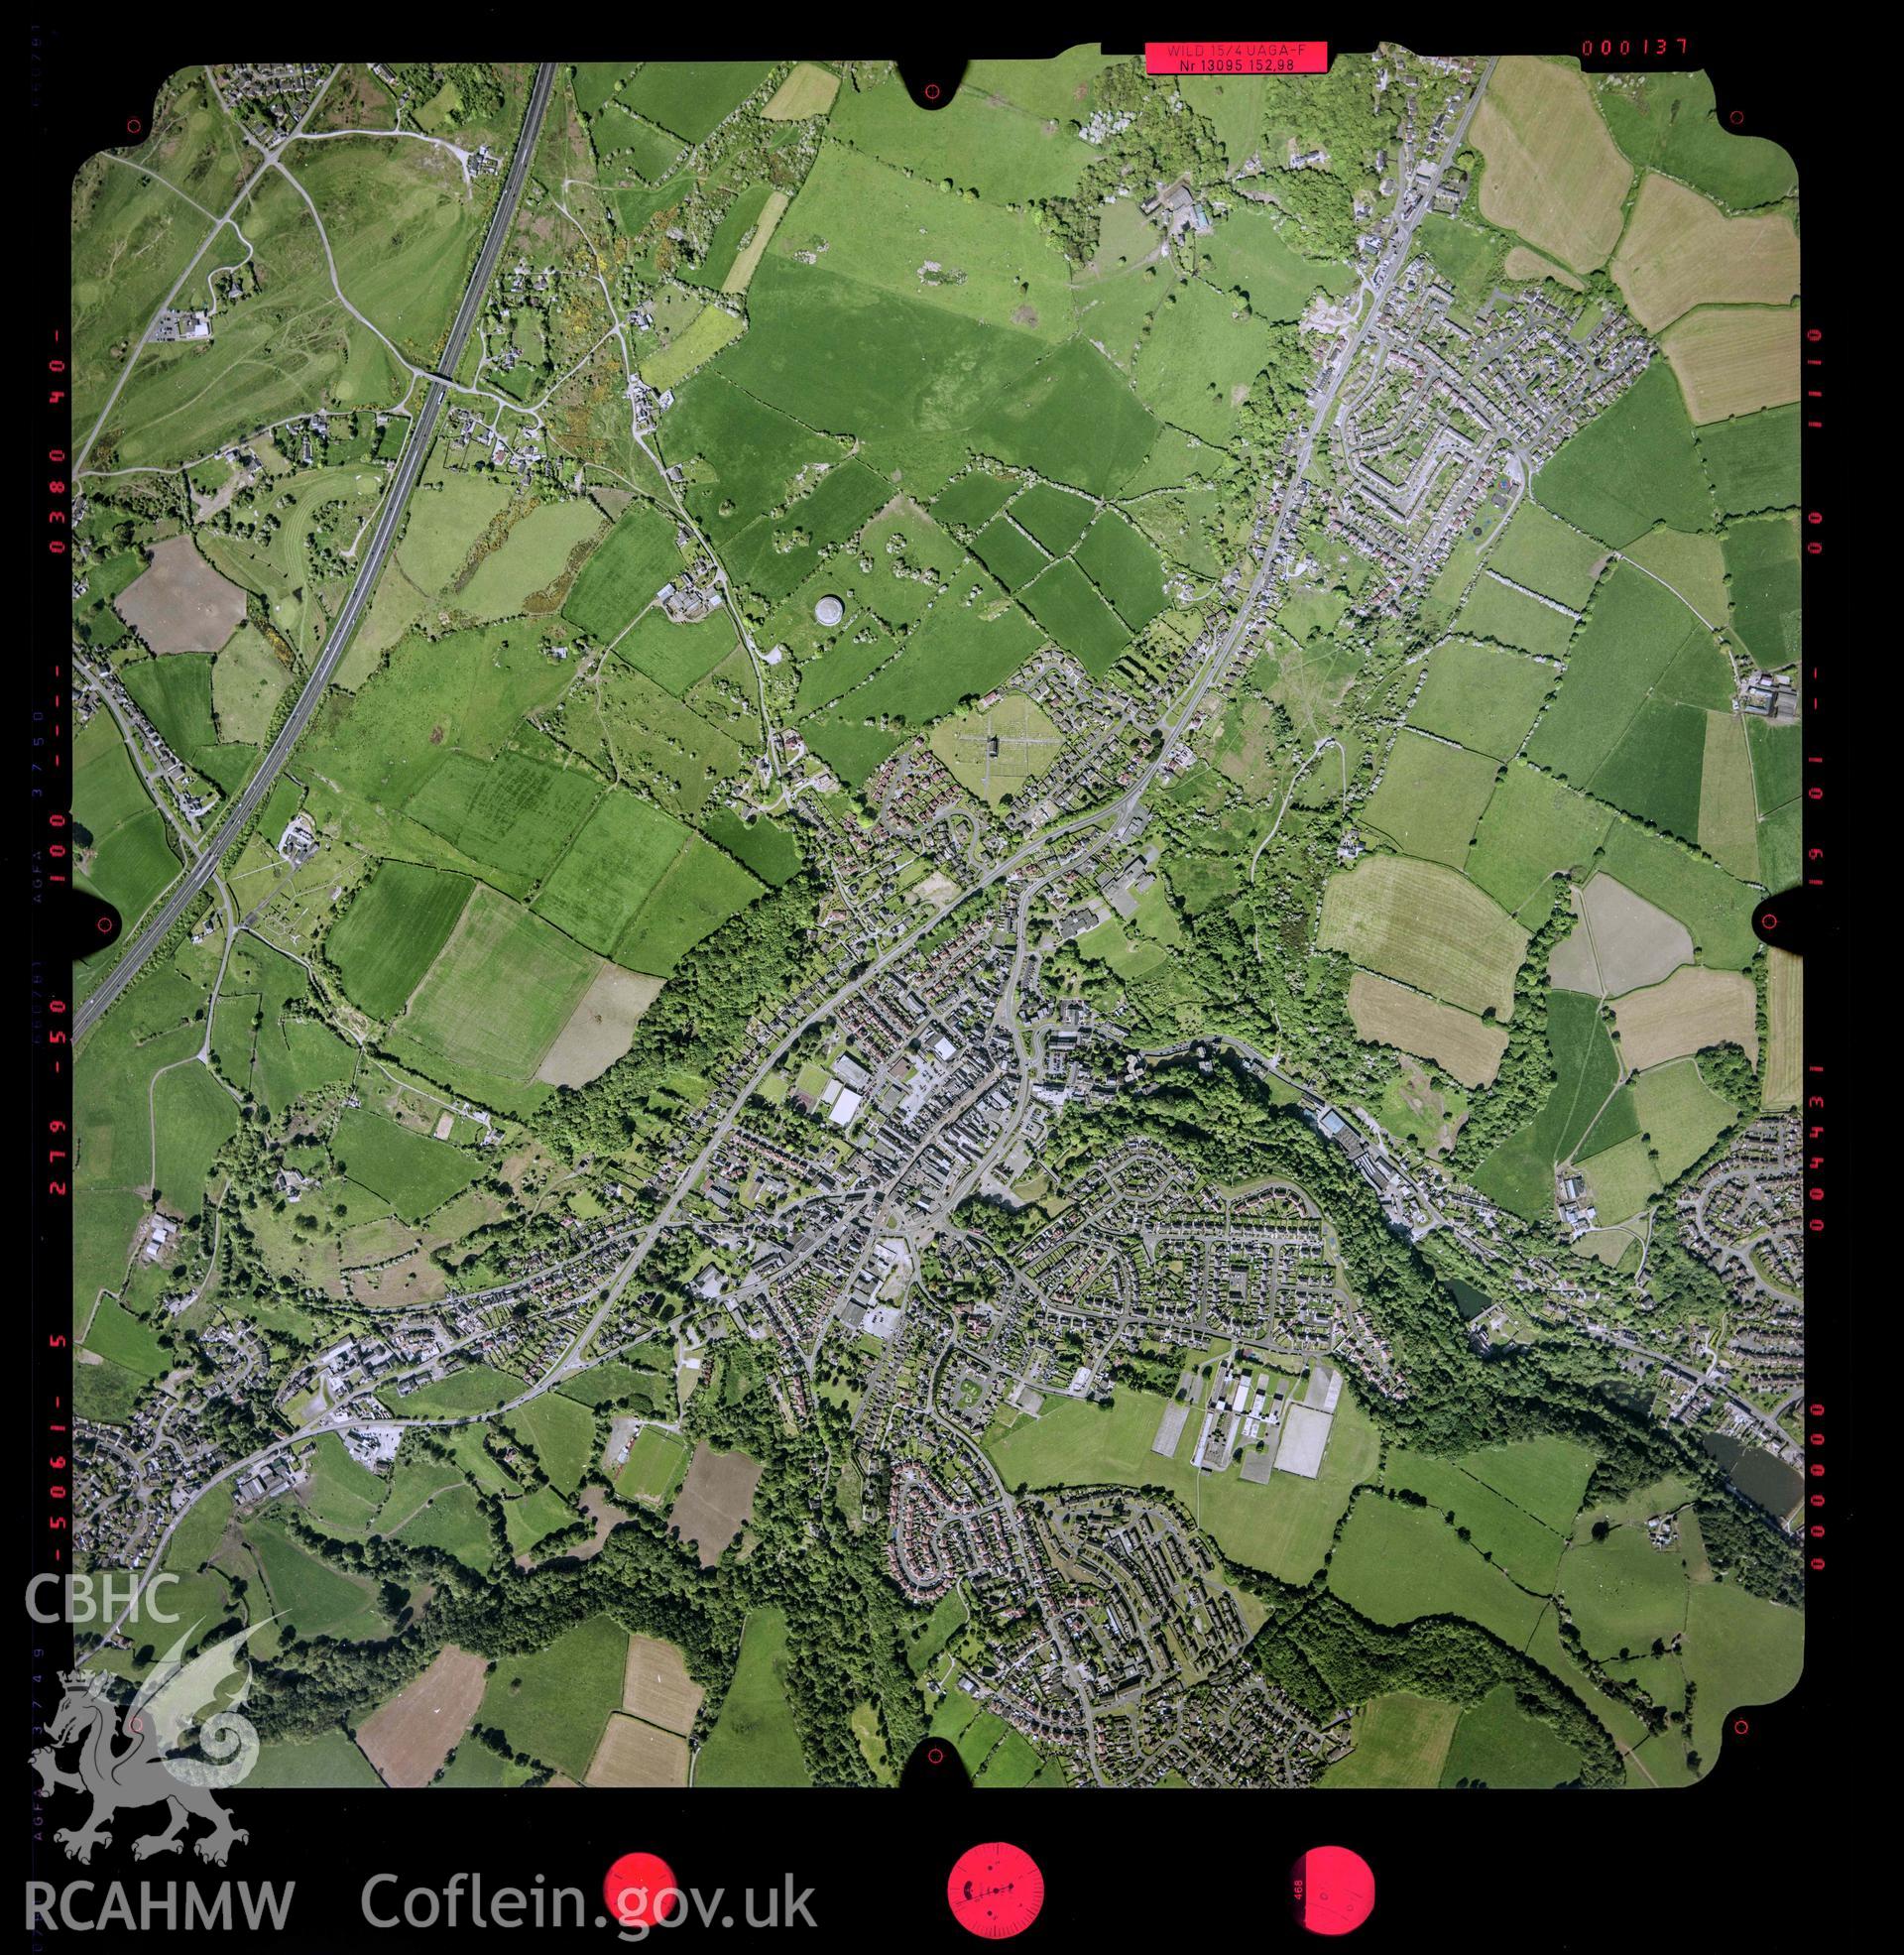 Digitized copy of an aerial photograph showing an area near Holywell, taken by Ordnance Survey, 2004. [Flight: 04-535 Fr 137].